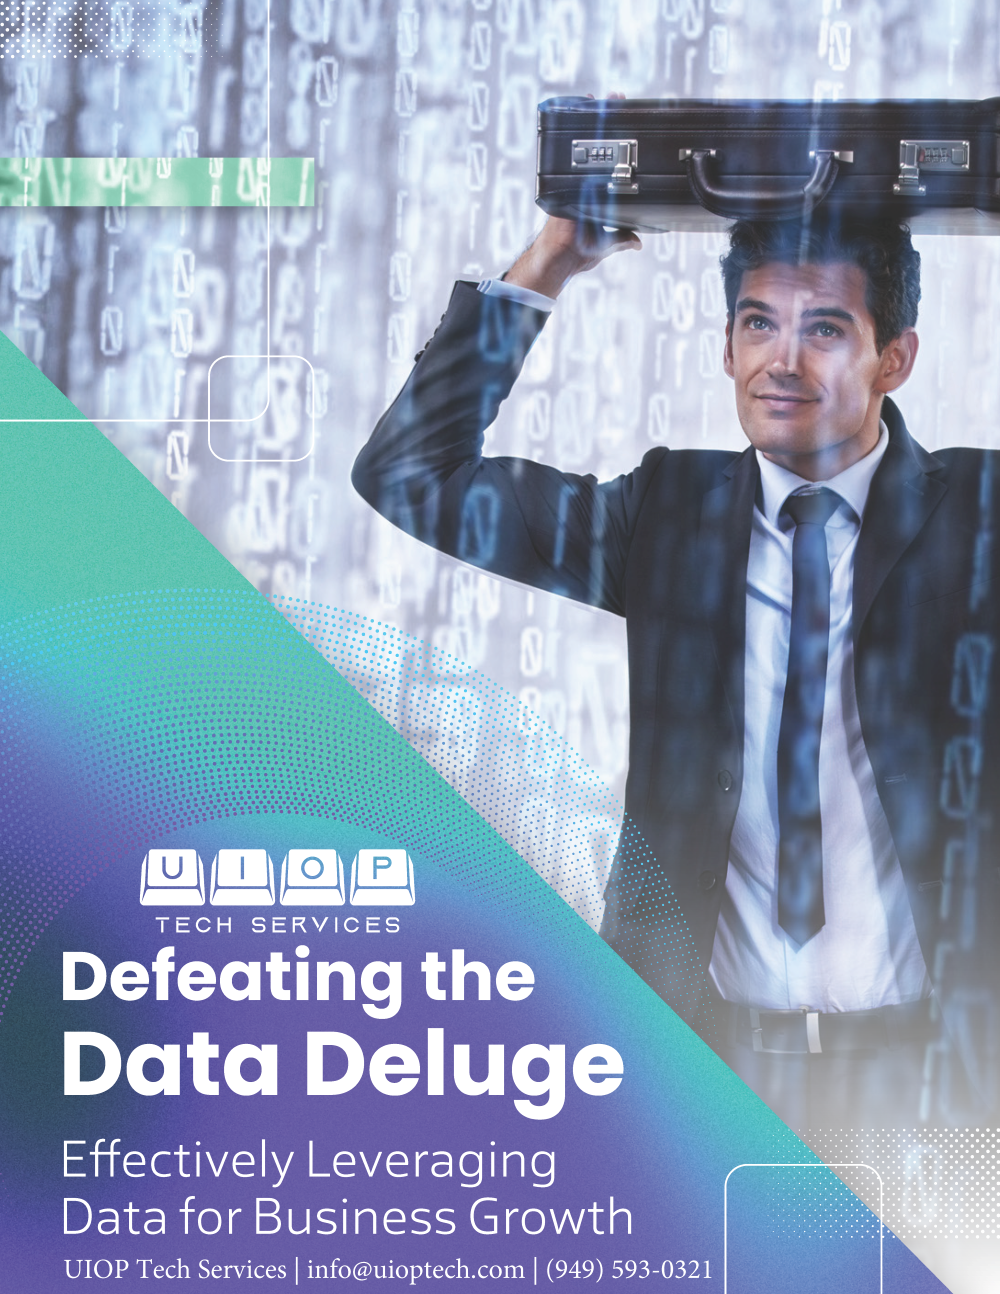 eBook: Effectively Leveraging Data for Business Growth